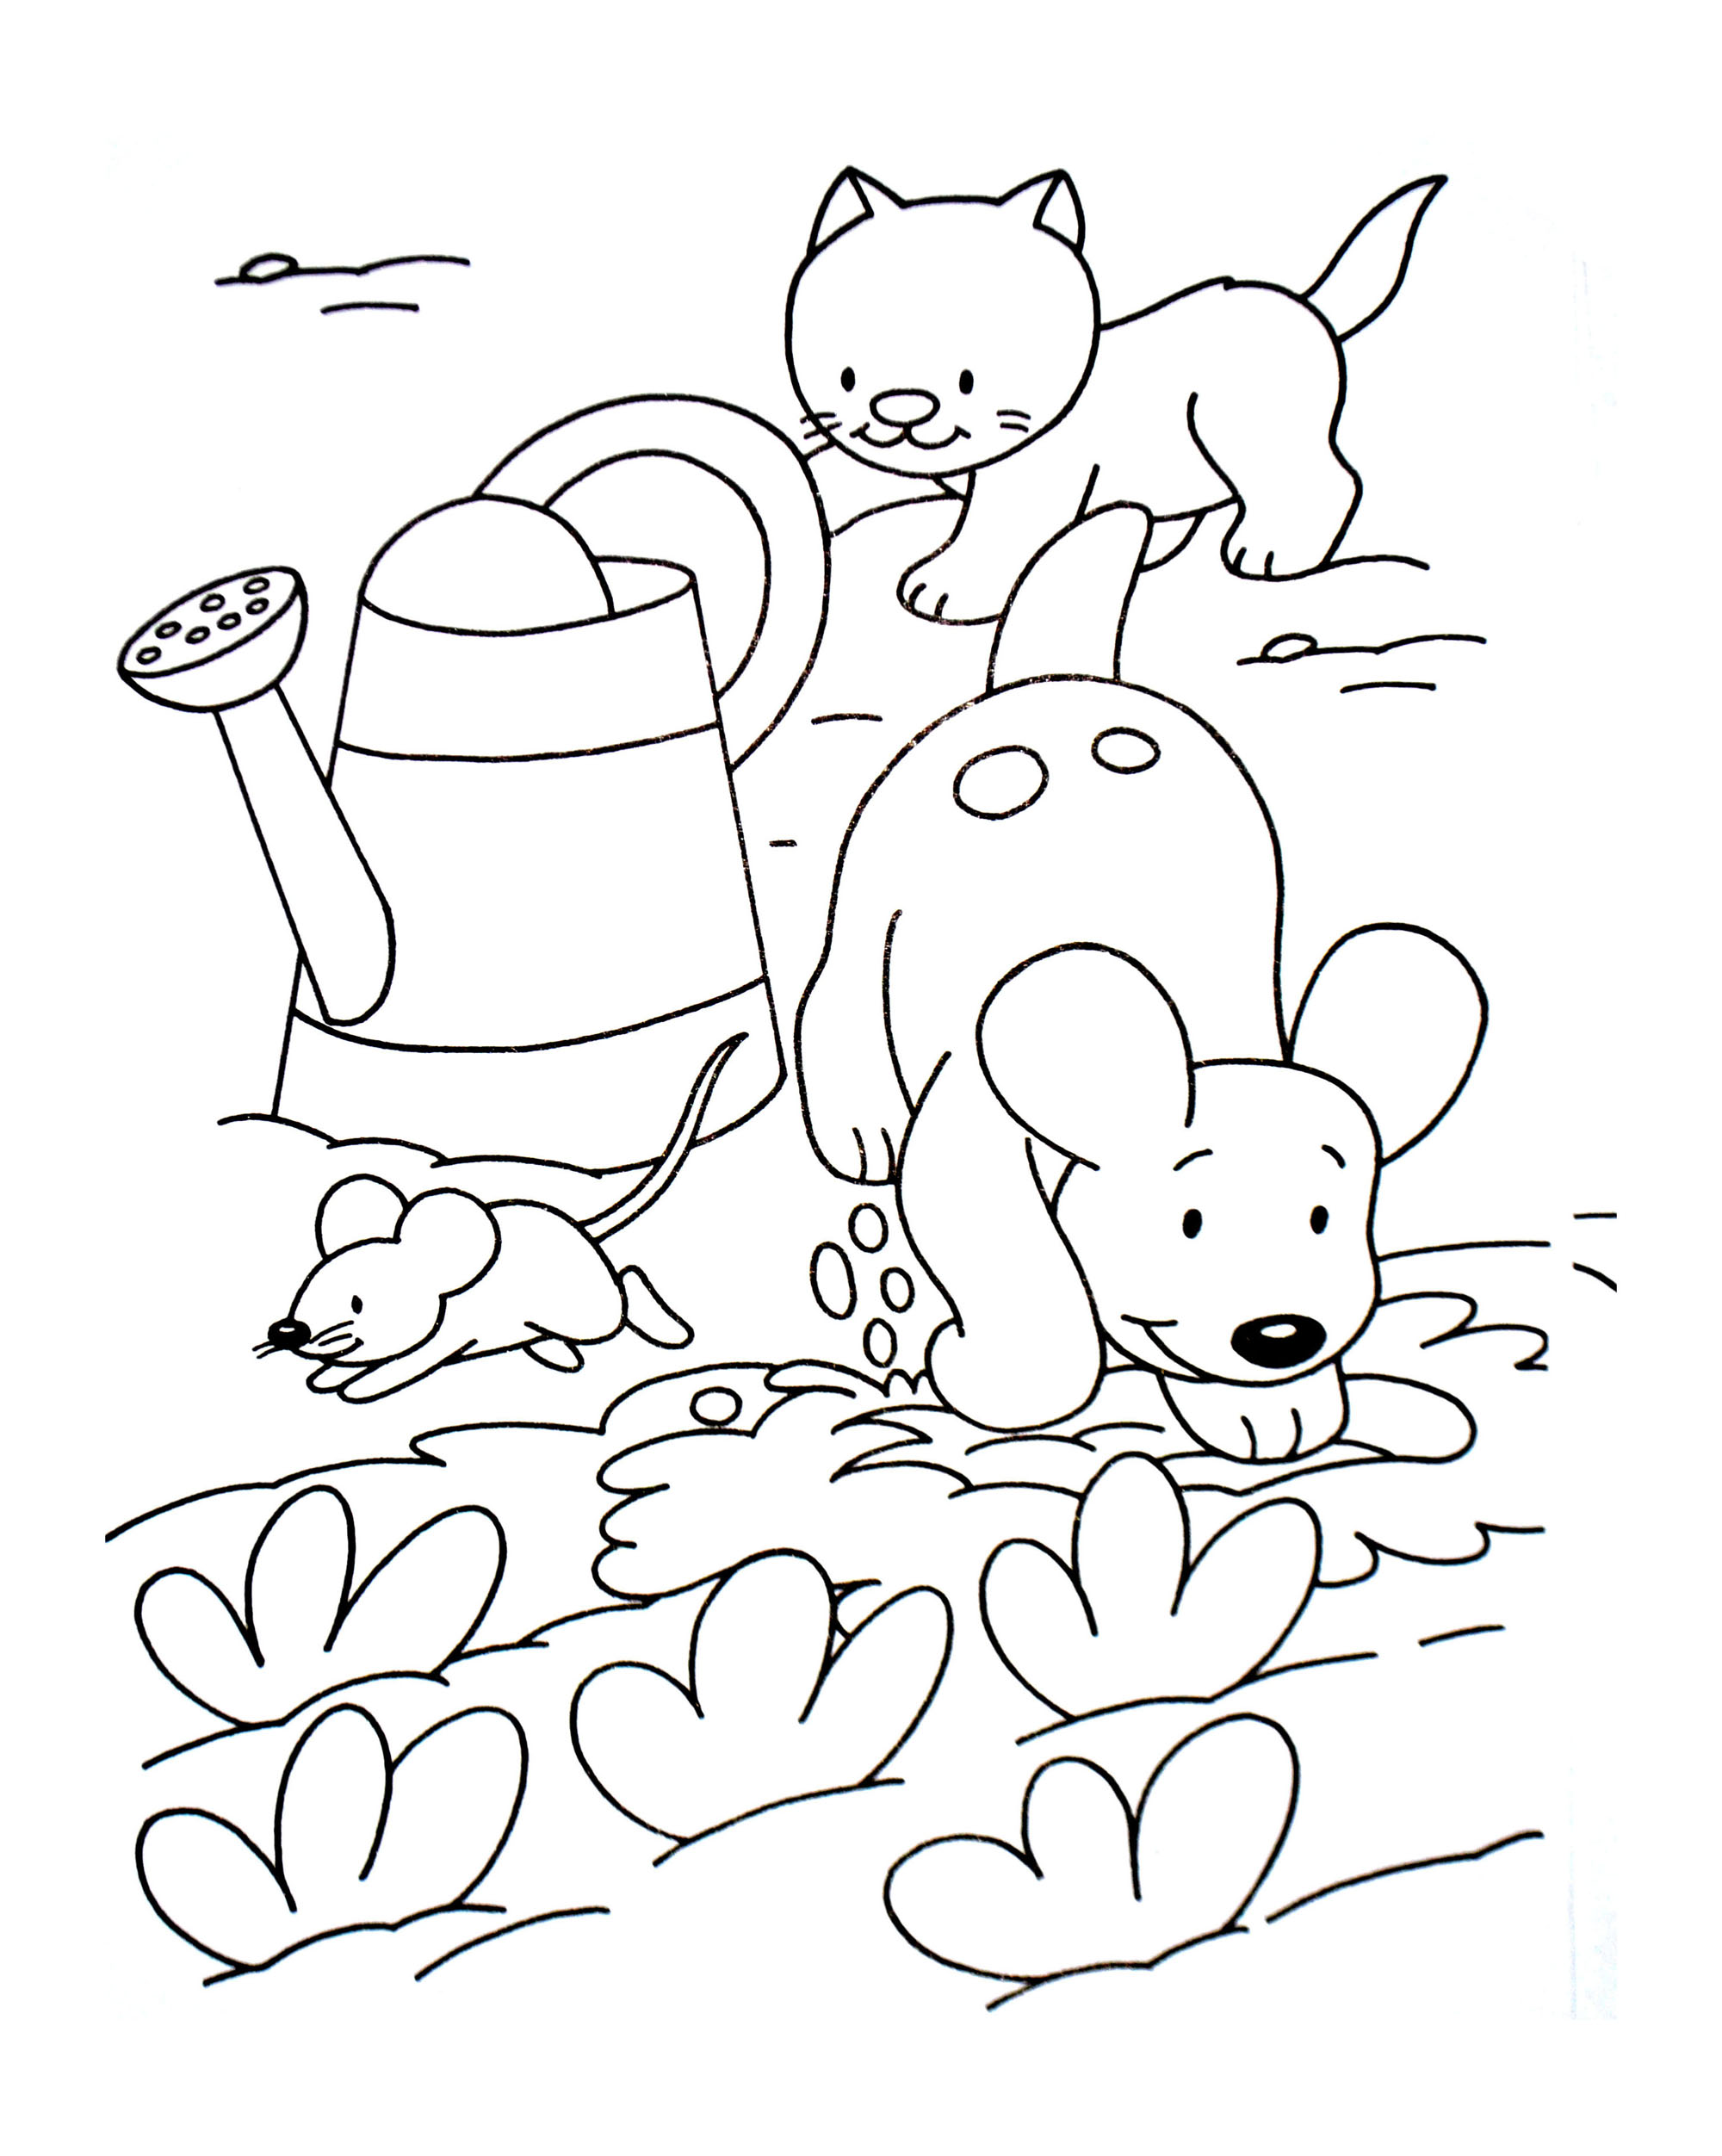 Dogs coloring page to download : Cat & dog with a mouse